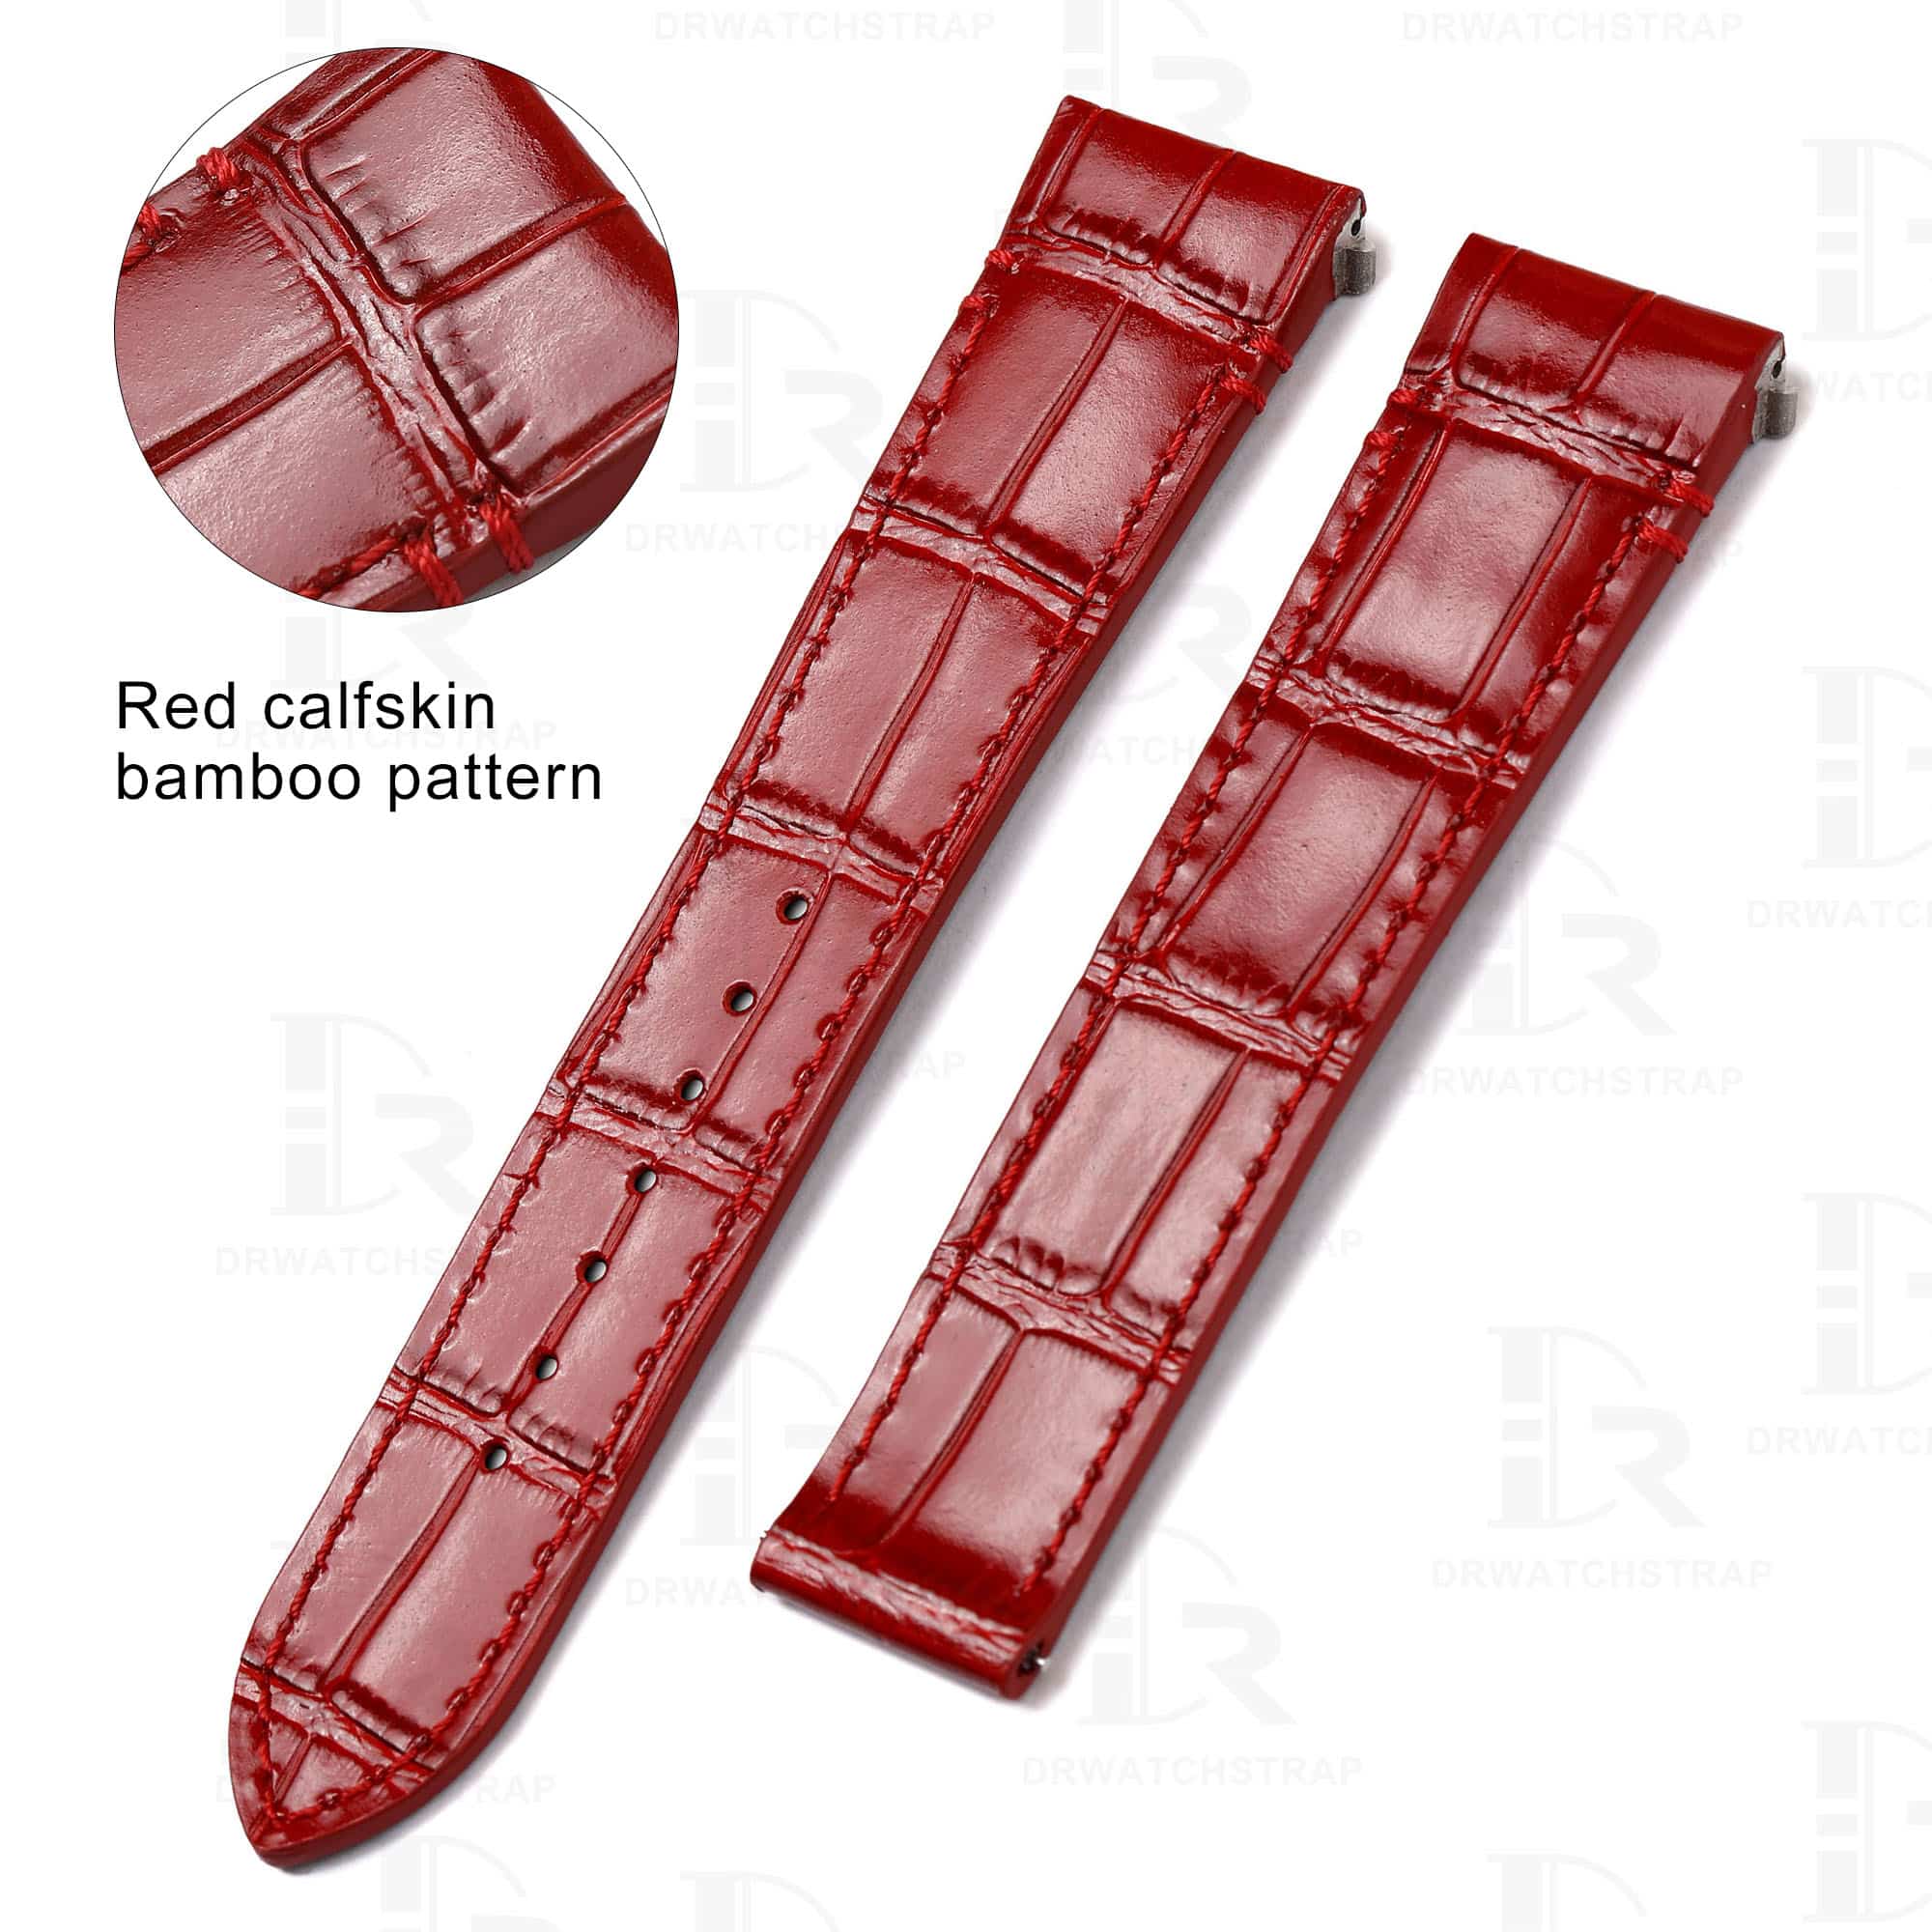 Custom Quickswitch system premium red calskin bamboo leather watch strap replacement for New Cartier de Santos watches